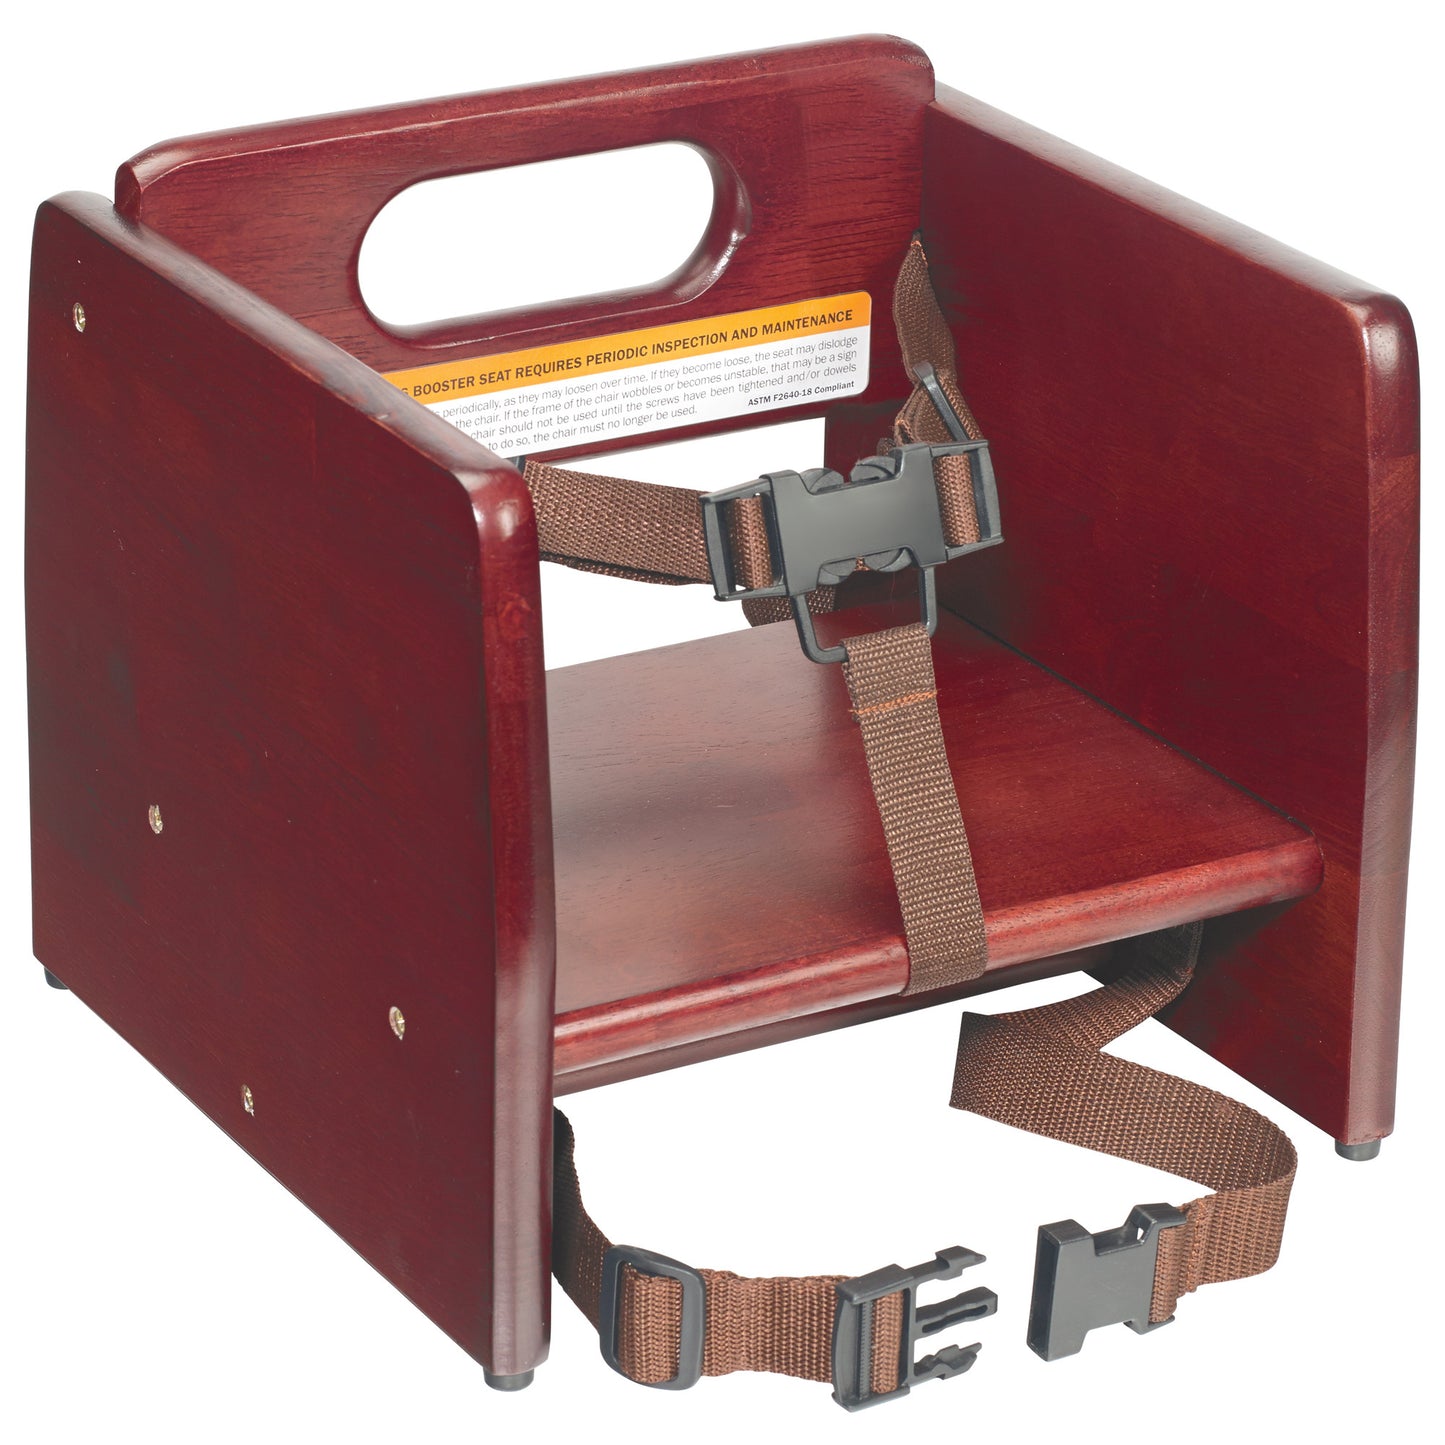 CHB-703 - Stacking Wooden Booster Seat - Mahogany